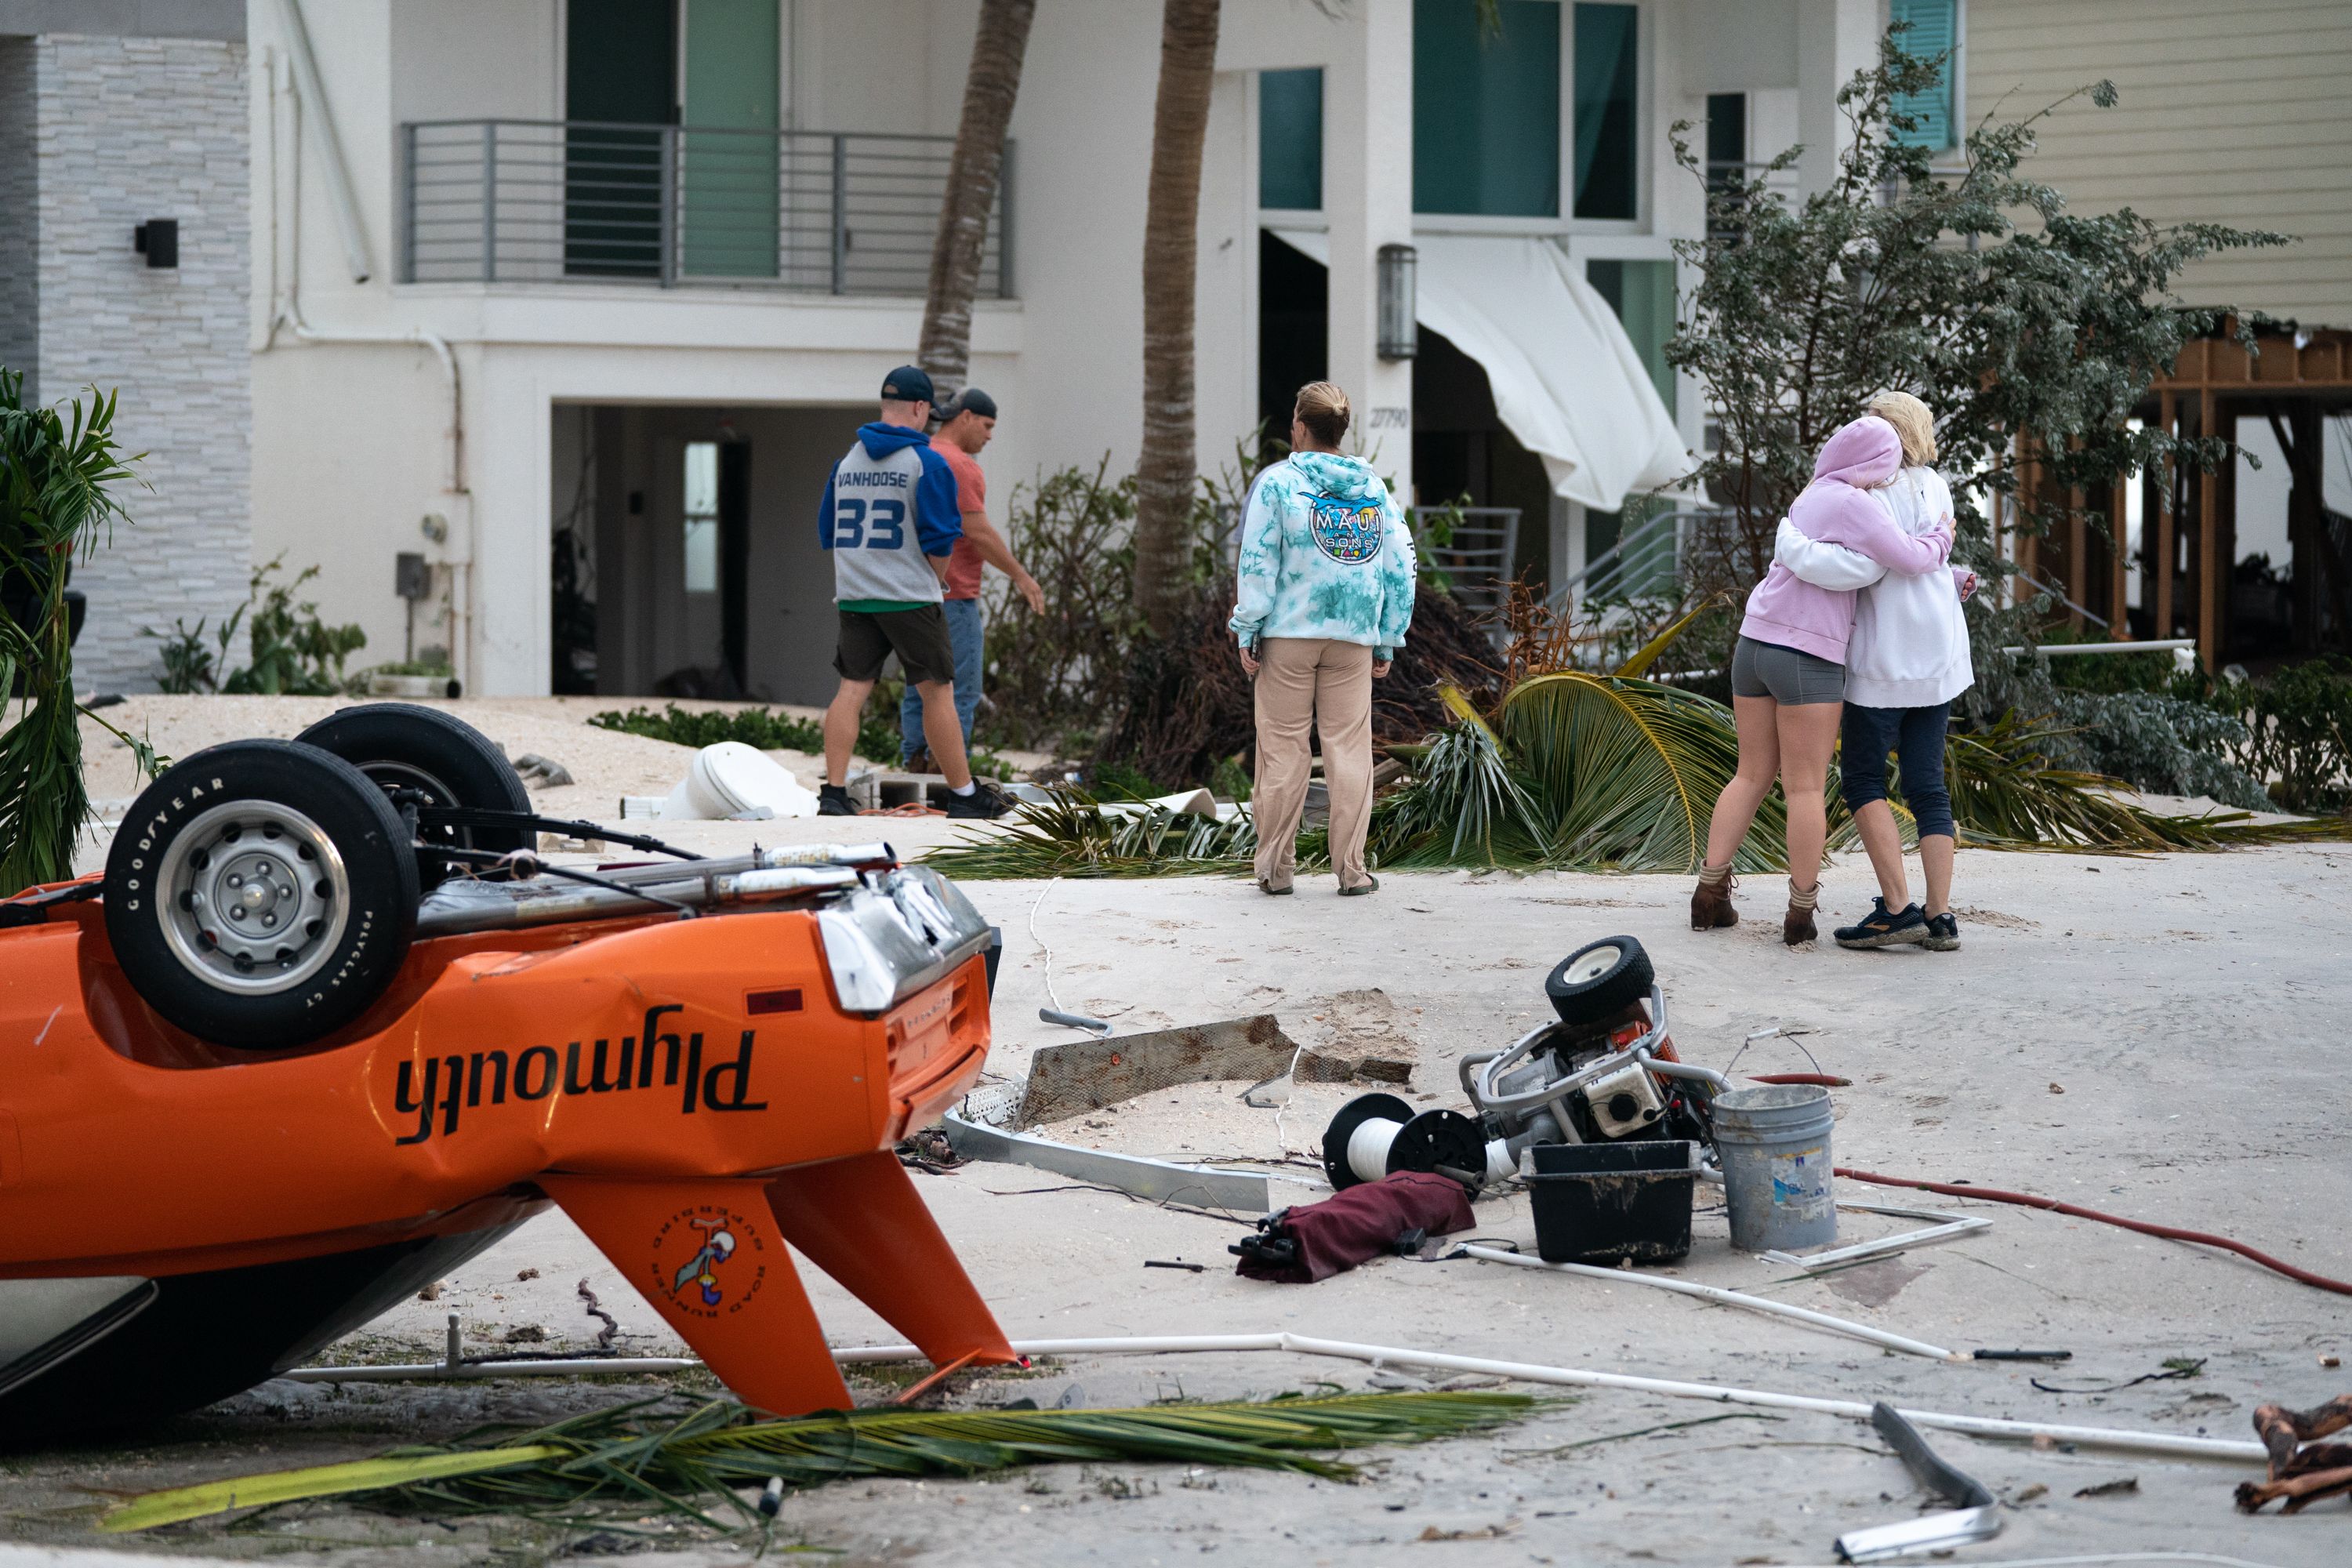 people standing around hurricane debris and a damaged car